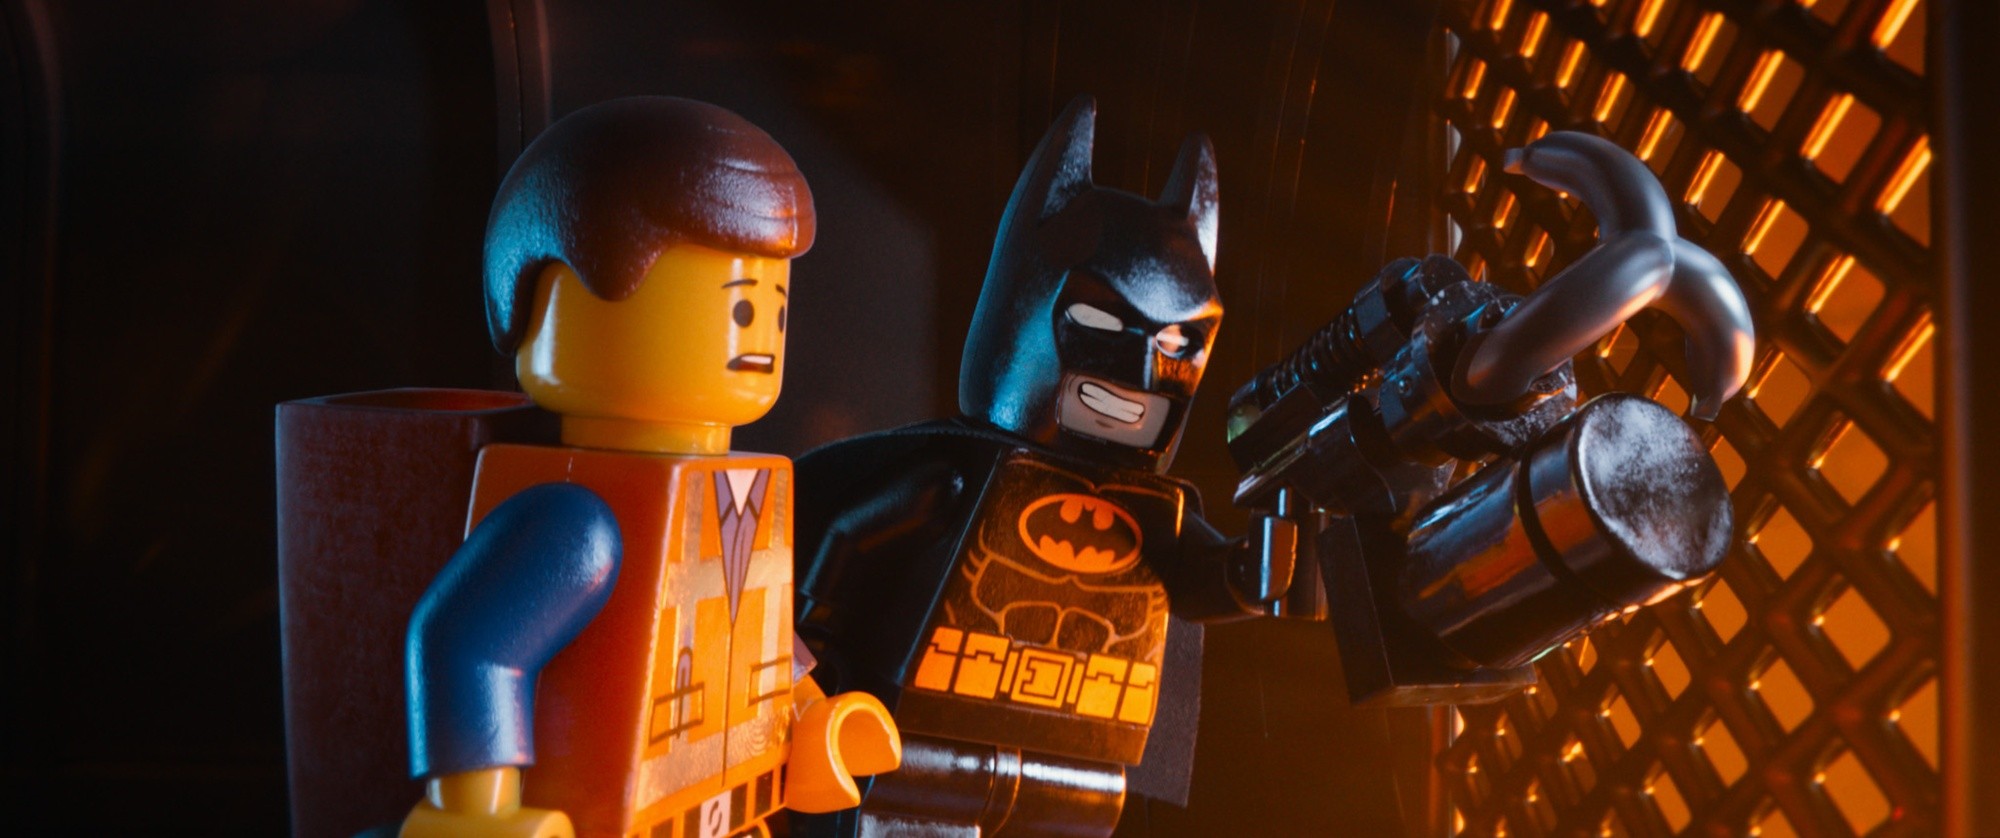 Emmet and Batman from Warner Bros. Pictures' The Lego Movie (2014)